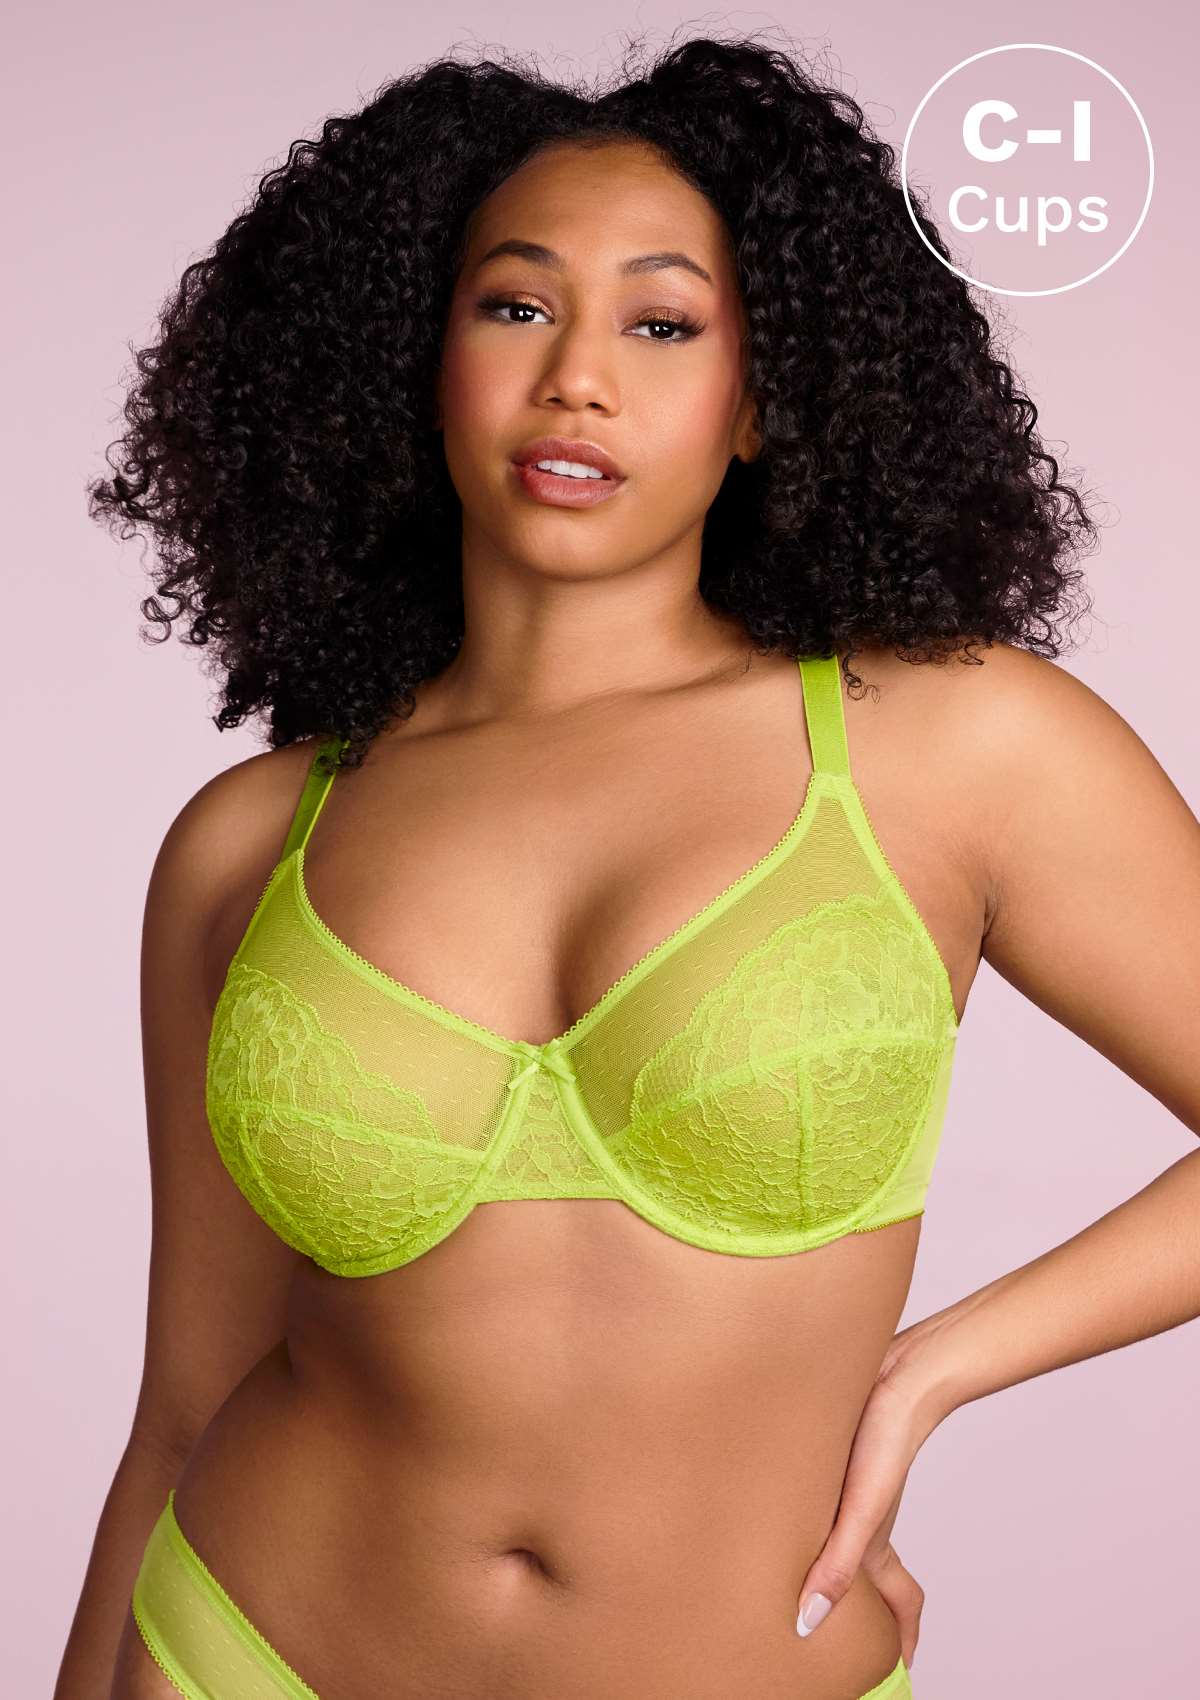 HSIA Enchante Full Cup Minimizing Bra: Supportive Unlined Lace Bra - Lime Green / 38 / D